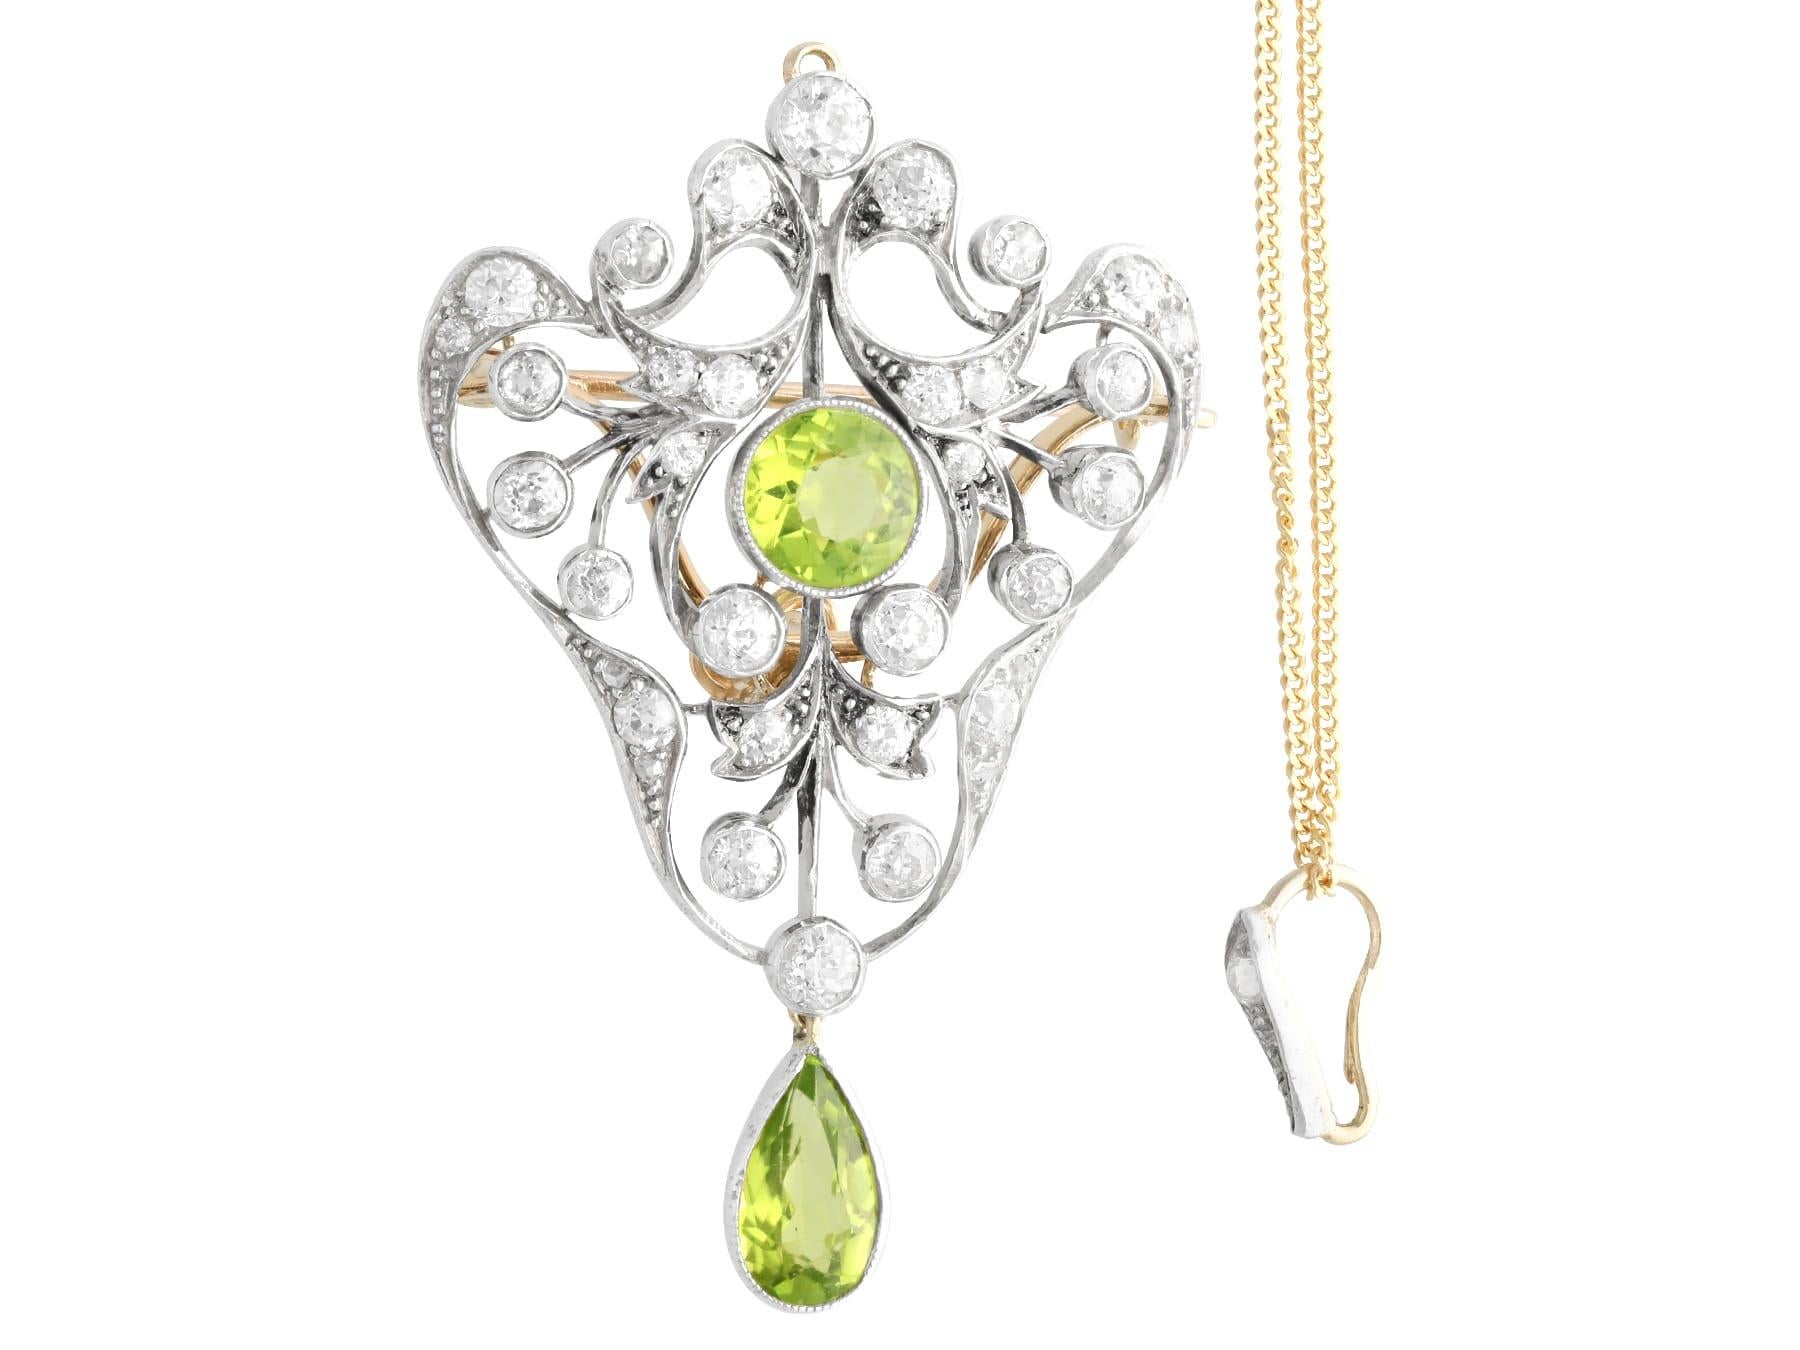 Round Cut Antique 3.02Ct Peridot and 3.41Ct Diamond, 14k Yellow Gold Pendant / Brooch For Sale